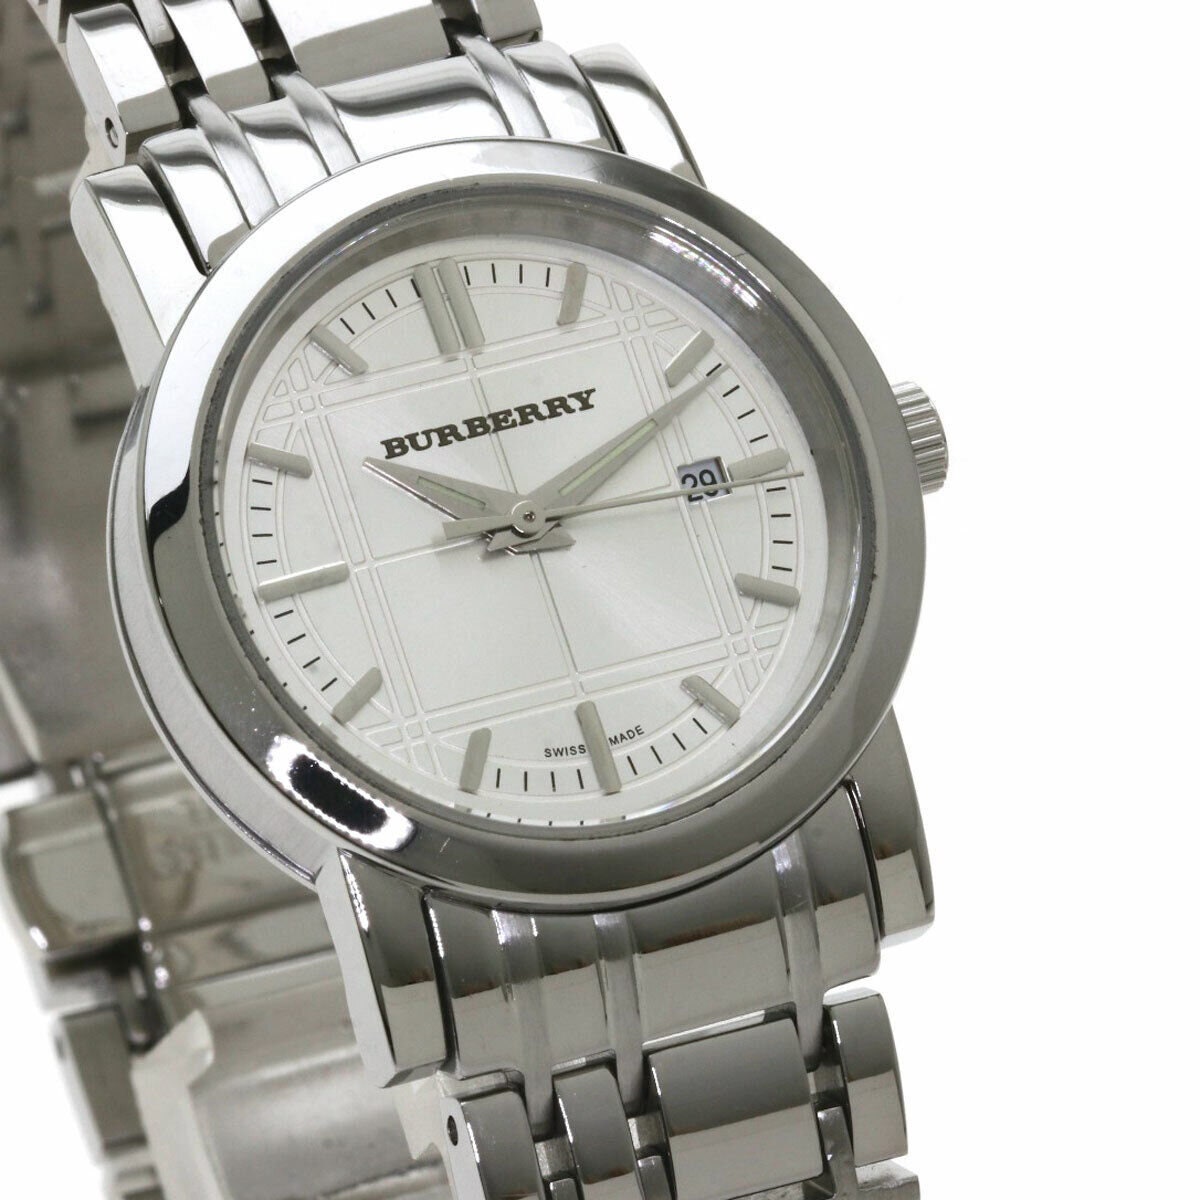 Vintage Burberry Womens Watch Swiss Time Watches Stainless - Etsy UK